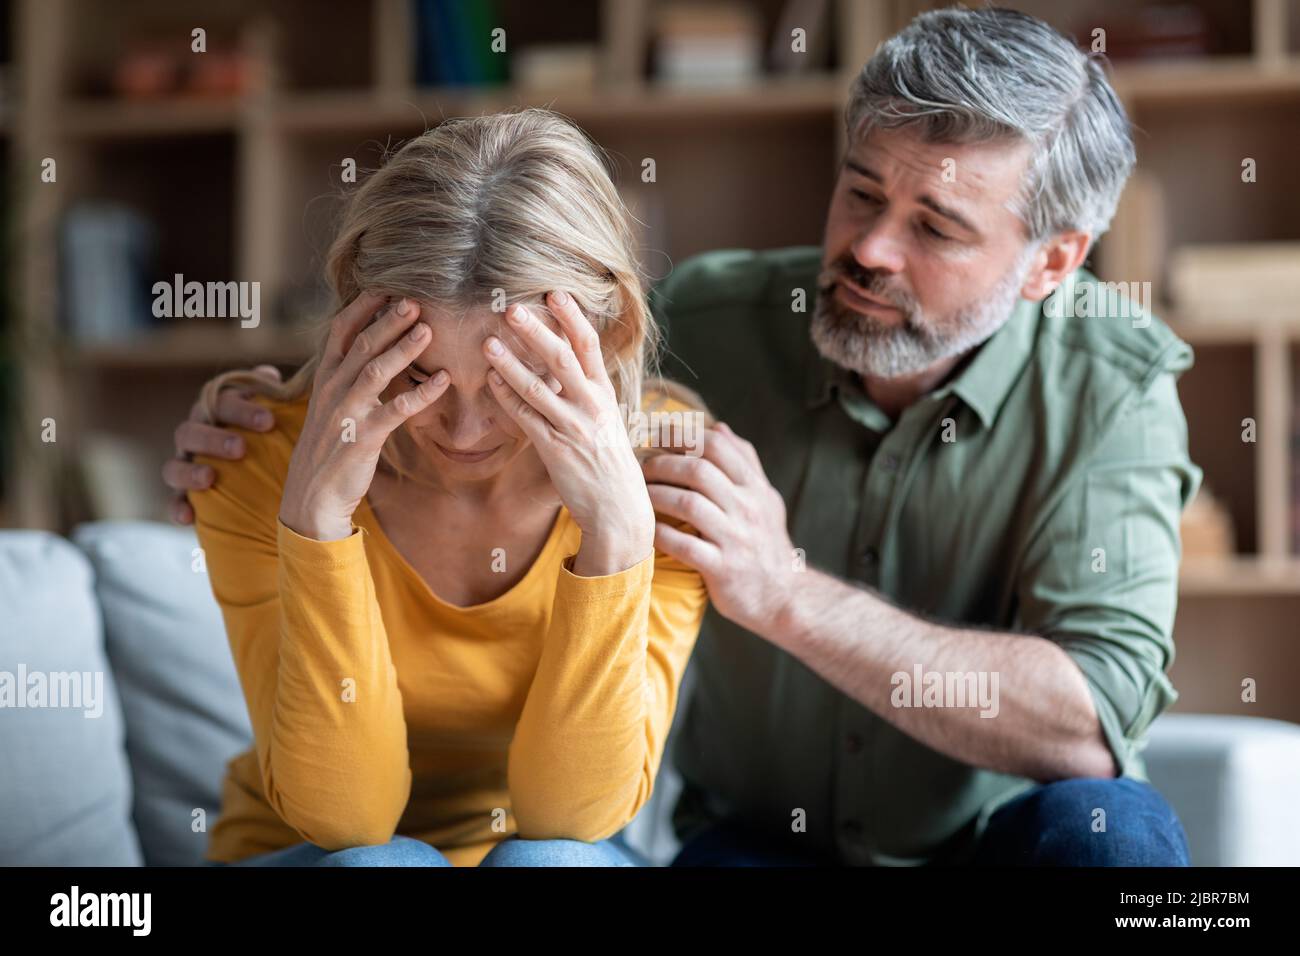 Midlife Crisis In Women. Caring Husband Comforting His Depressed Wife At Home Stock Photo